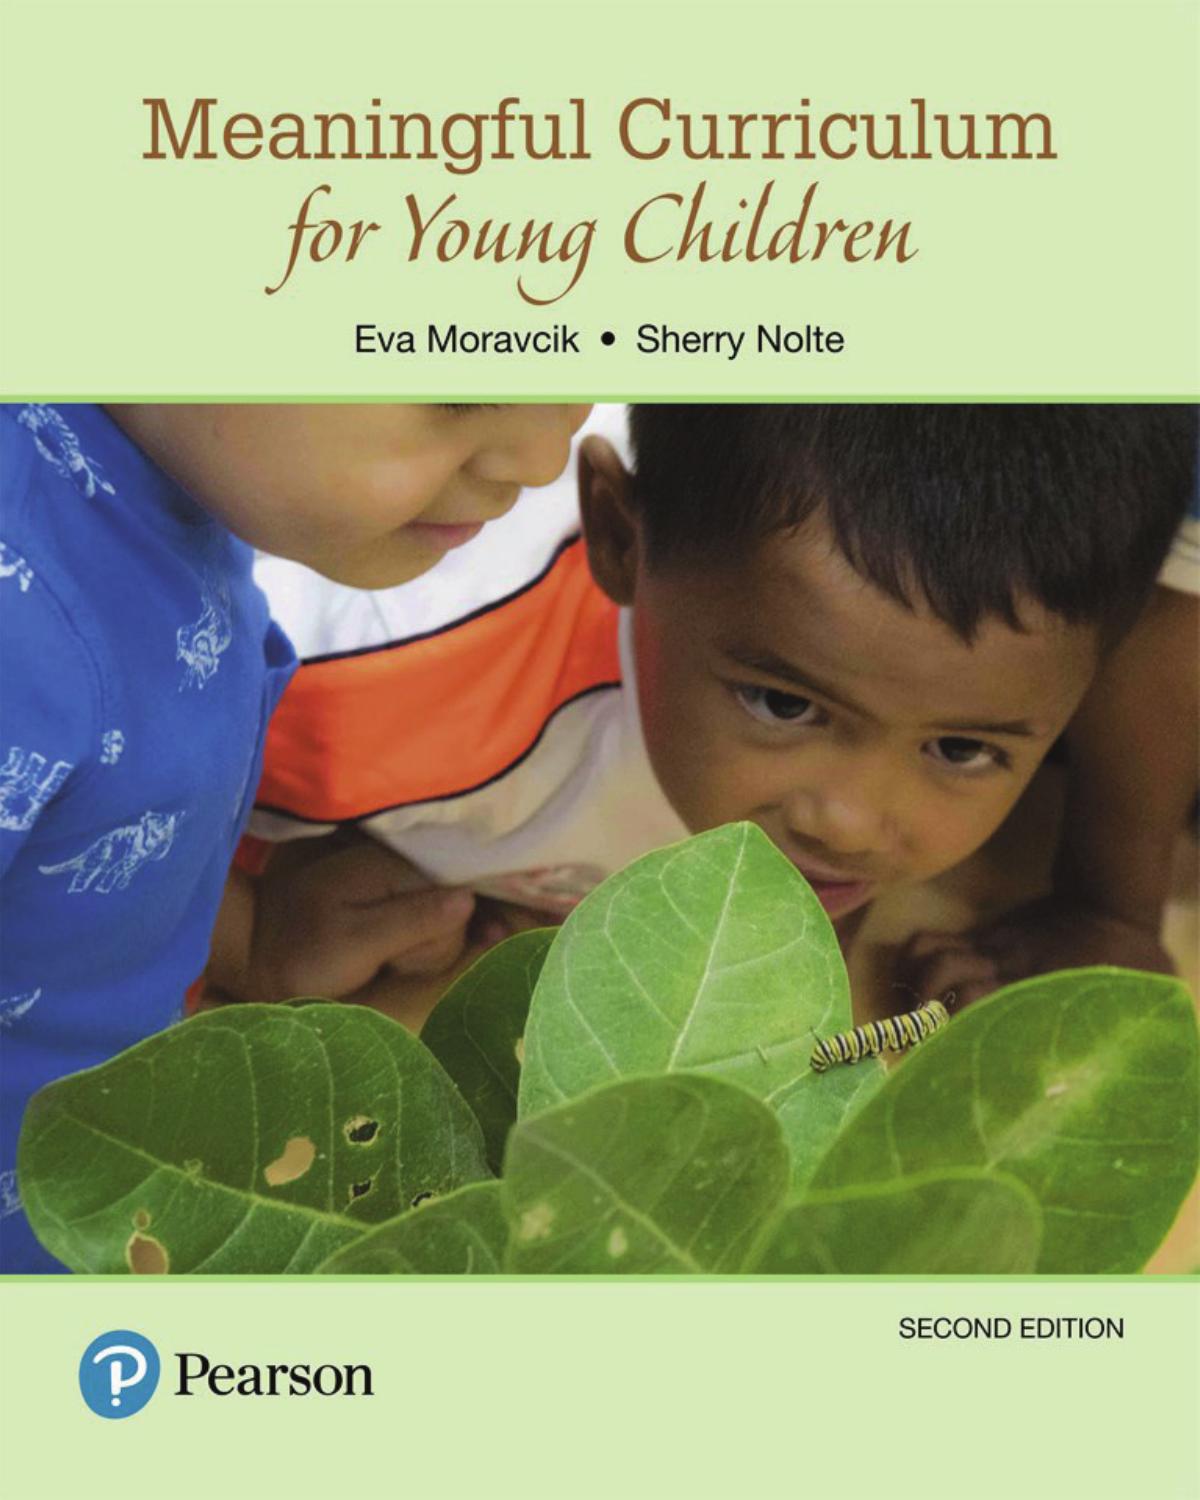 (Test Bank)Meaningful Curriculum for Young Children, 2nd Edition by Eva Moravcik